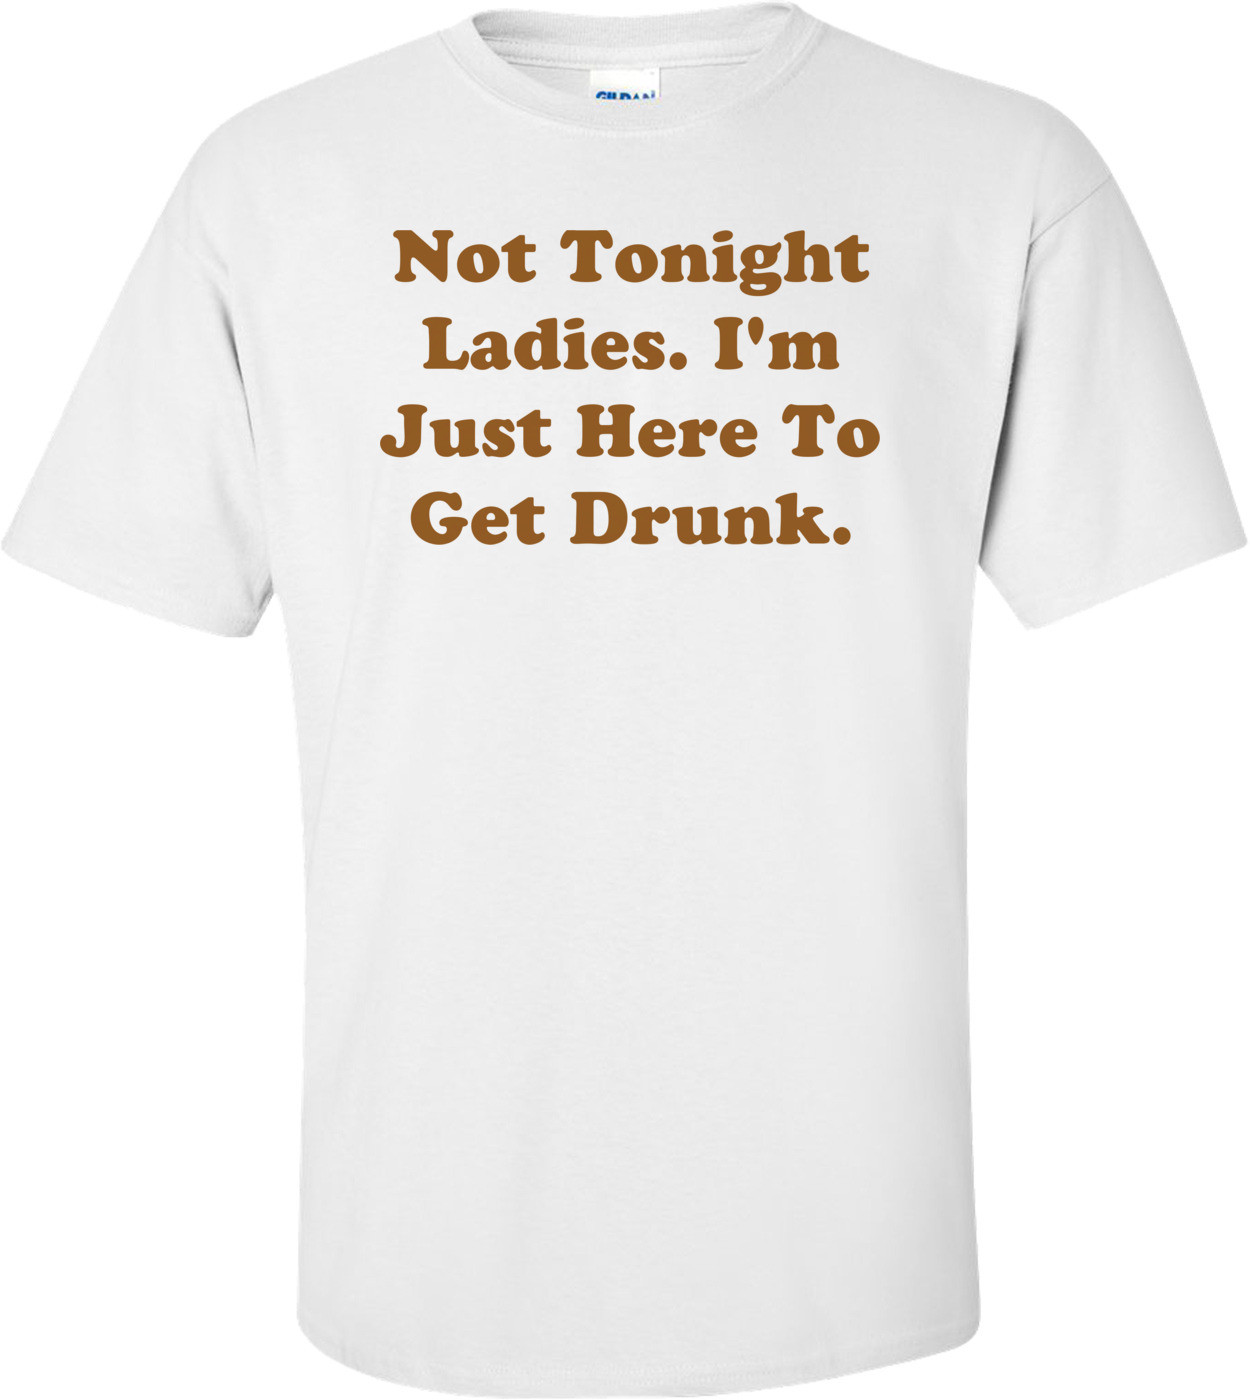 Not Tonight Ladies. I'm Just Here To Get Drunk. Shirt